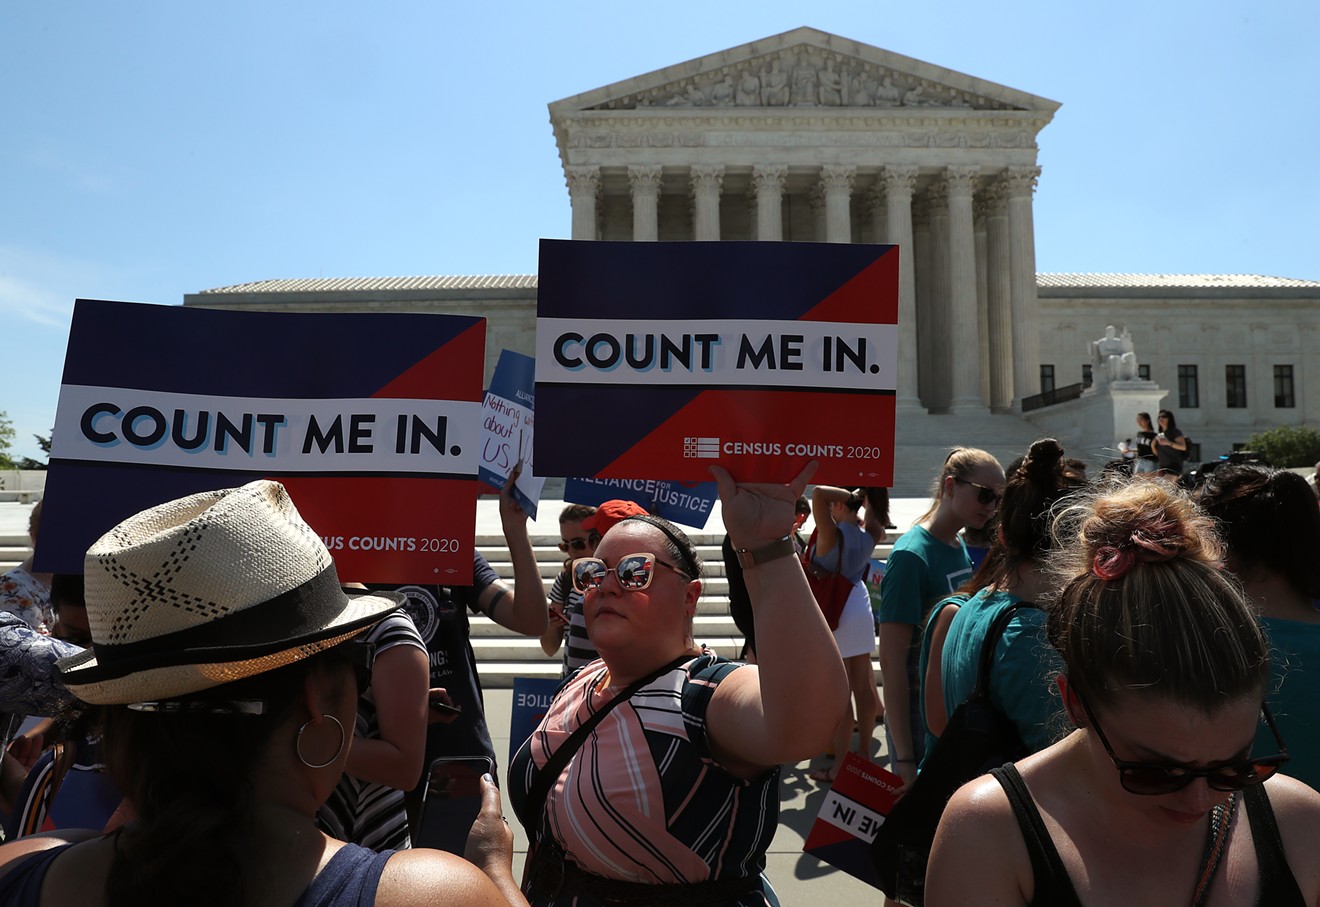 Activists gathered at the U.S. Supreme Court last year ahead of an anticipated decision regarding the use of a citizenship question on the 2020 census.